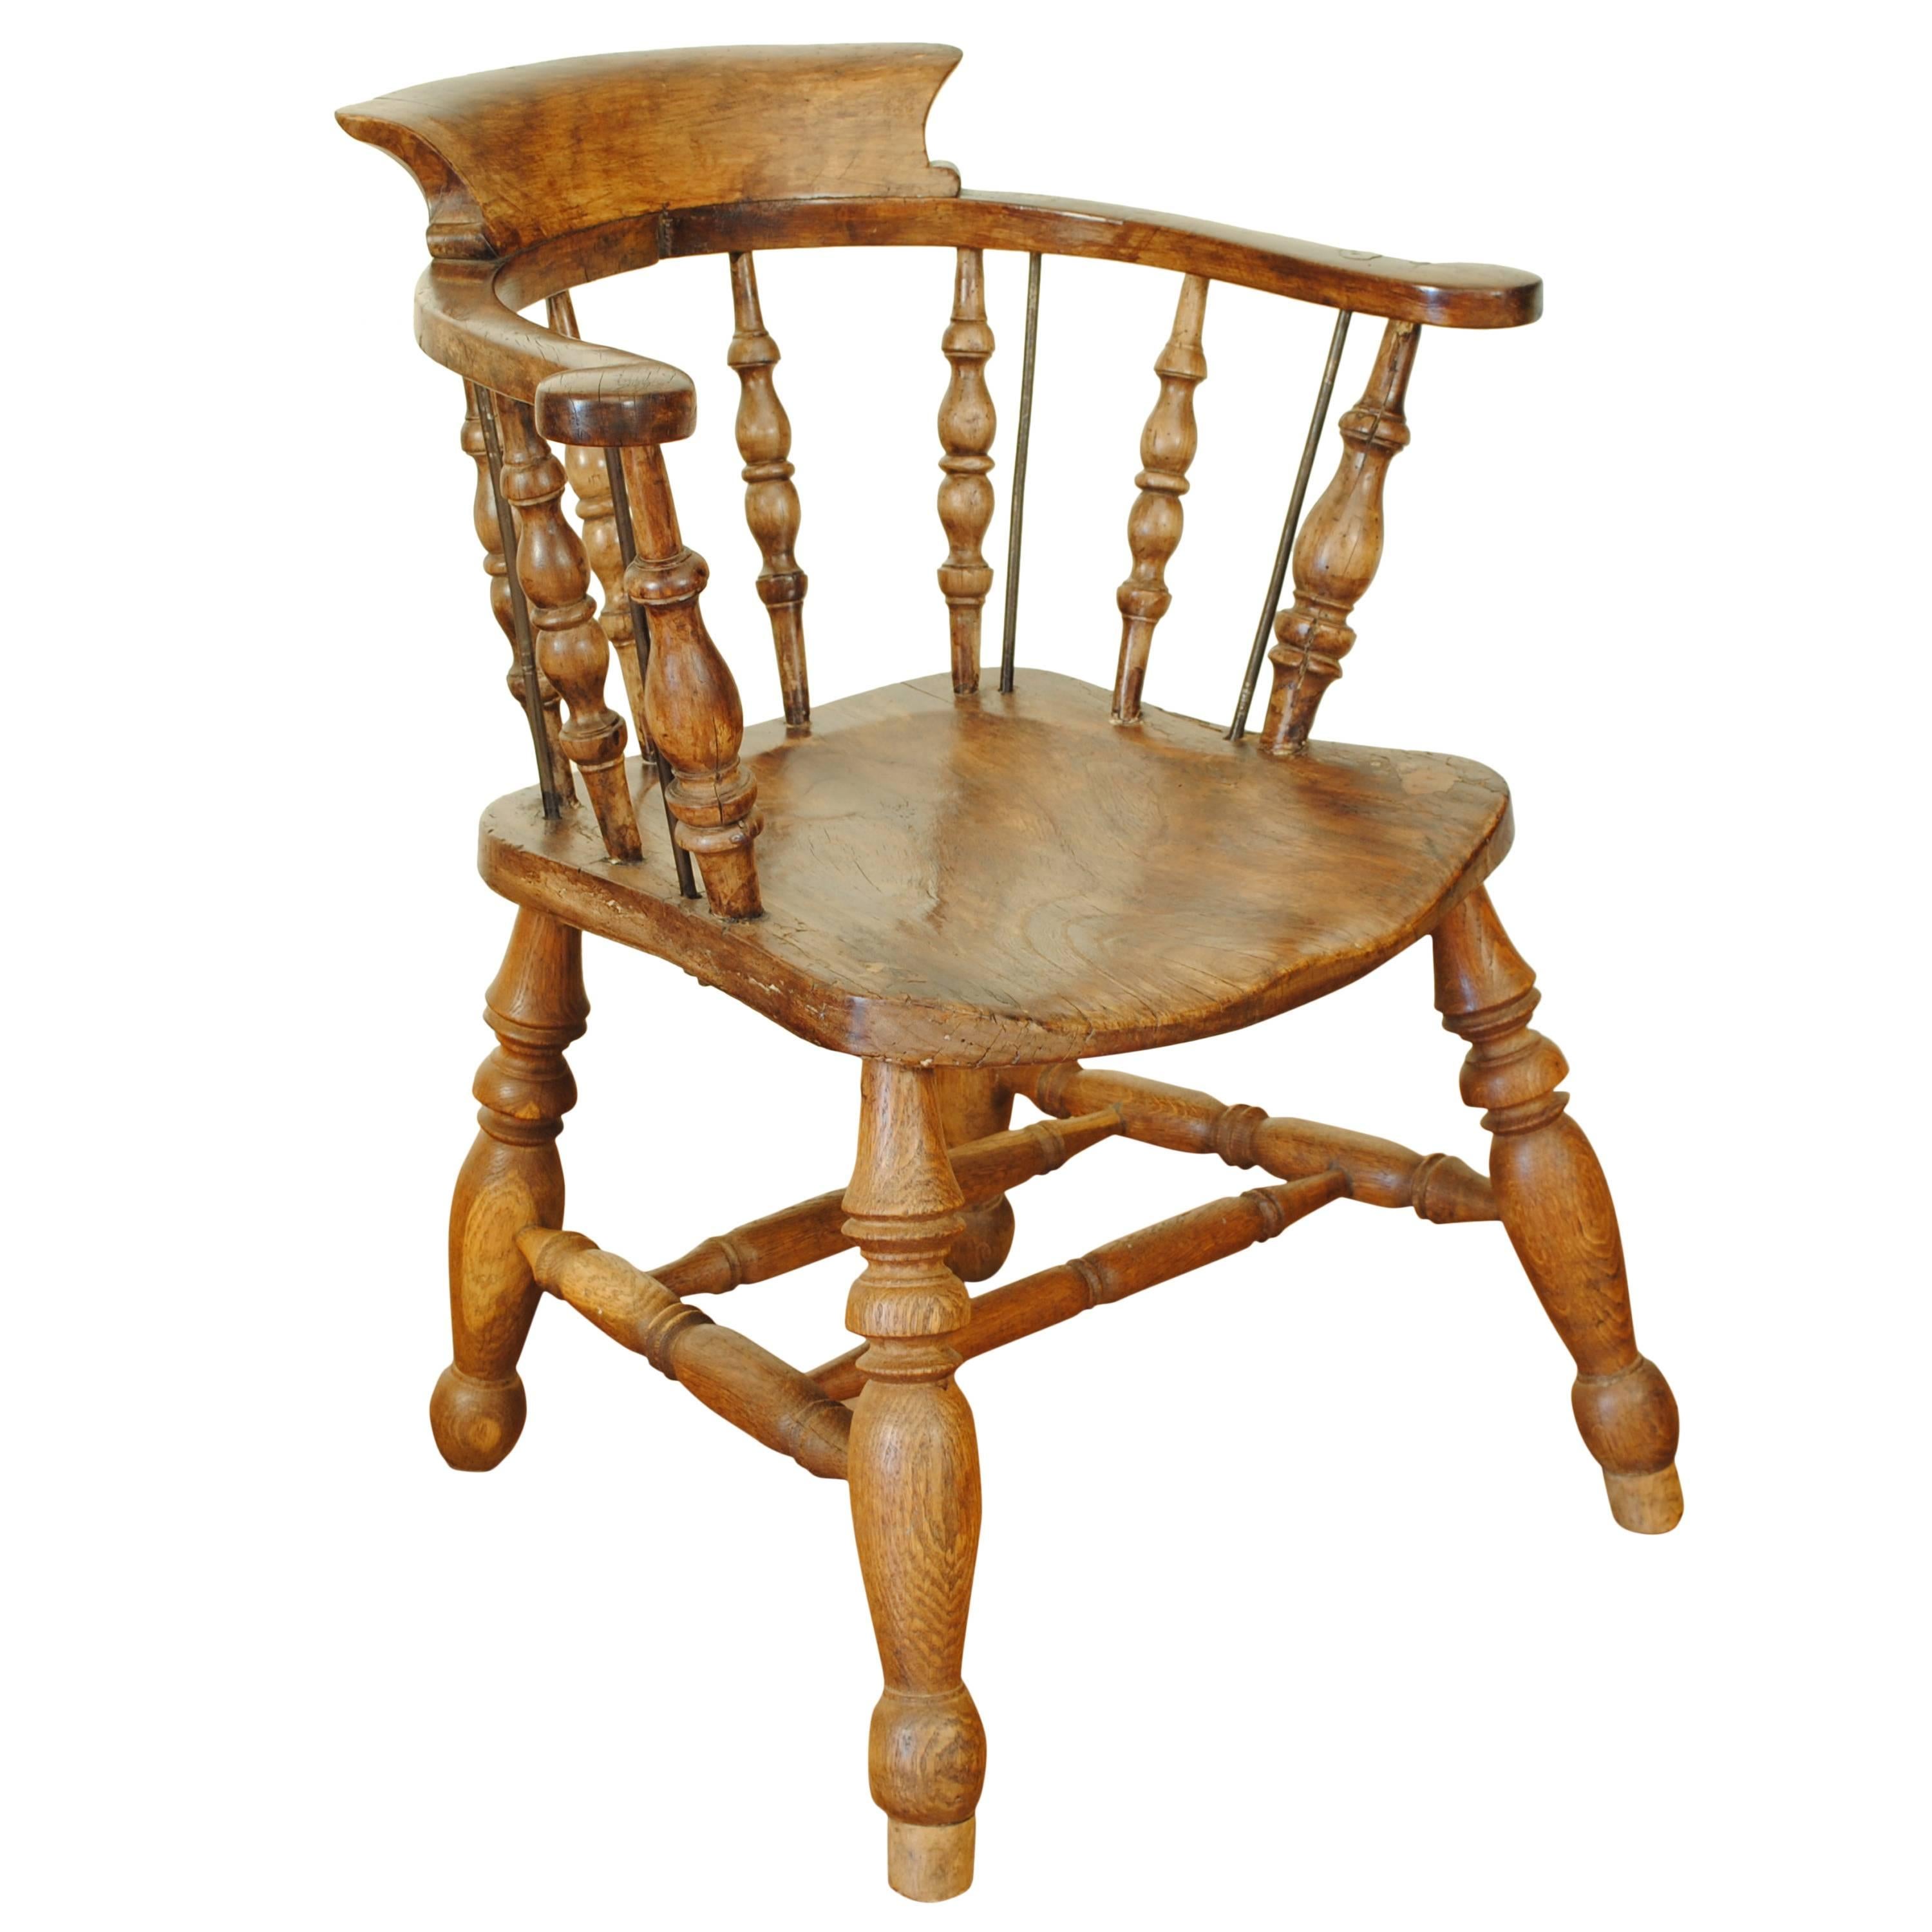 English, Elmwood Windsor Chair, Late 18th Century or Early 19th Century